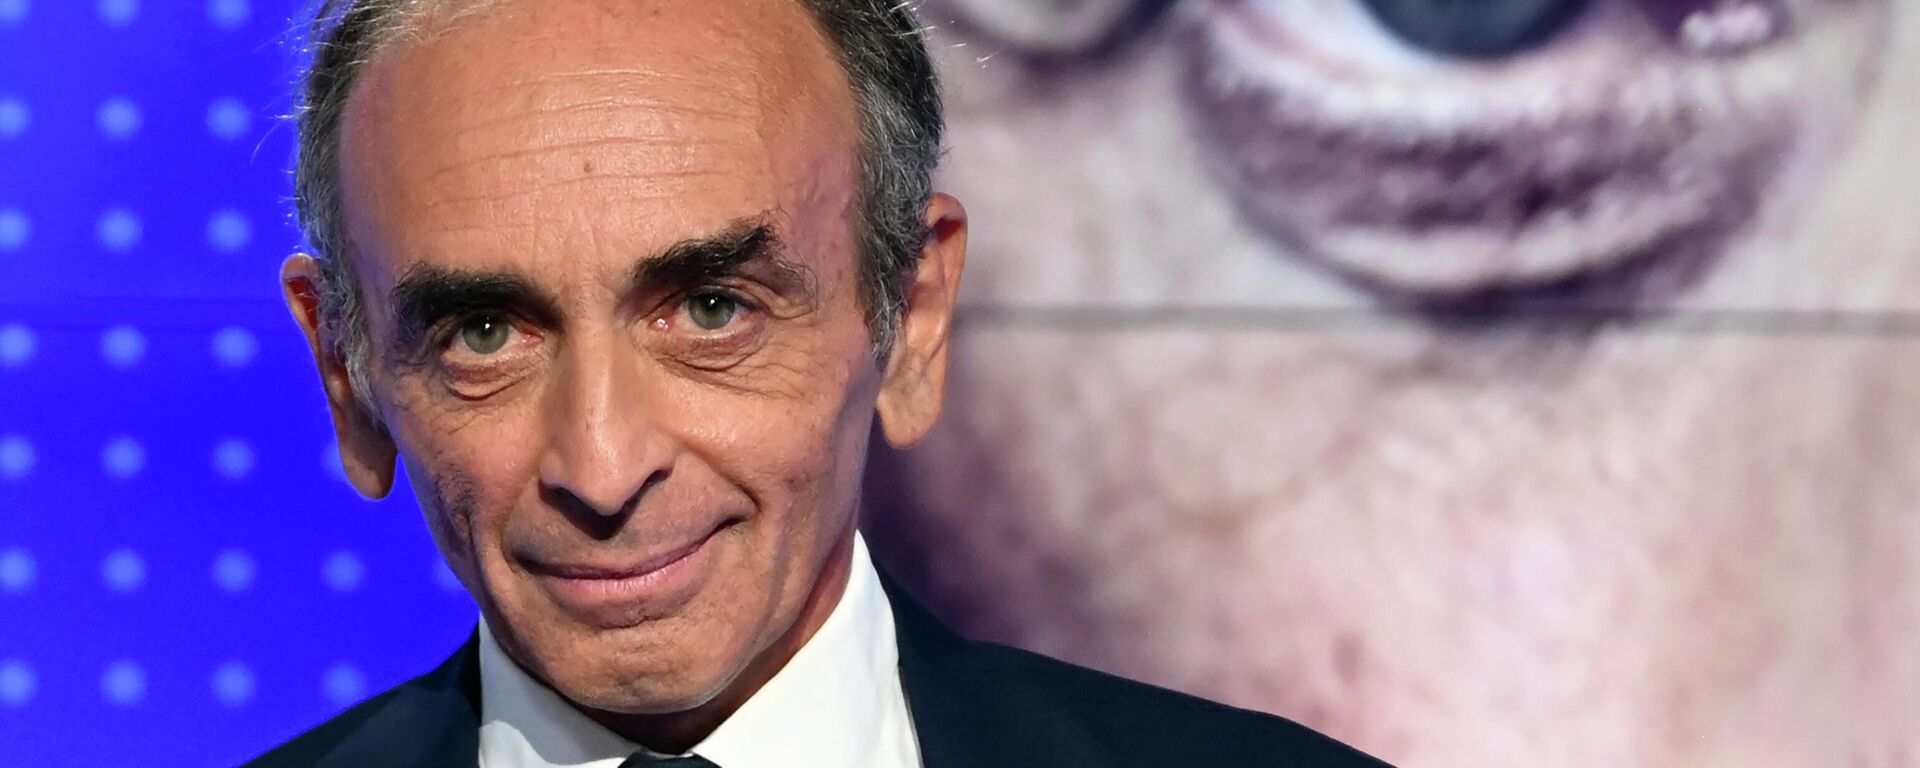 FILE - In this Sept.23, 2021 file photo, French media pundit Eric Zemmour poses prior to a televised debate between French far-left leader, Jean-Luc Melenchon in Paris - Sputnik International, 1920, 17.11.2021